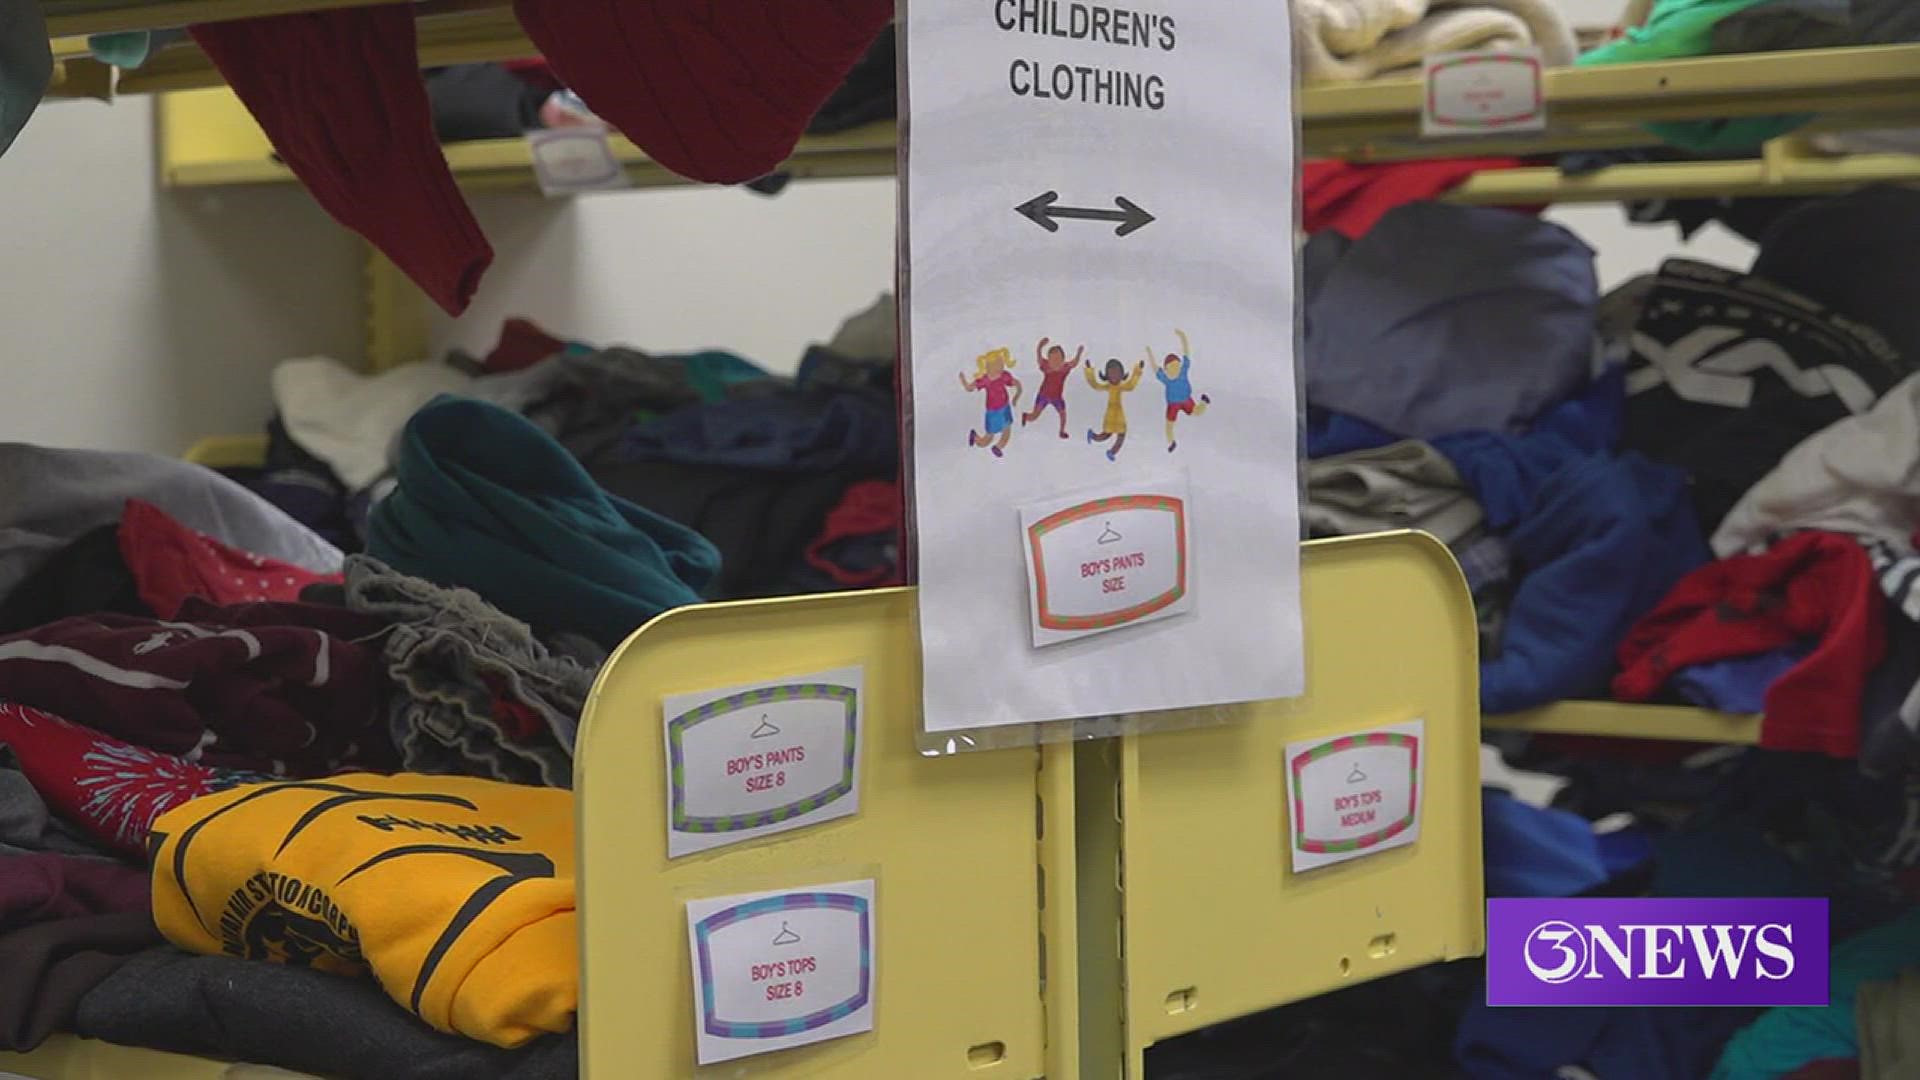 The Corpus Christi Independent School District is doing their part to help families in need with their Caring Corner.